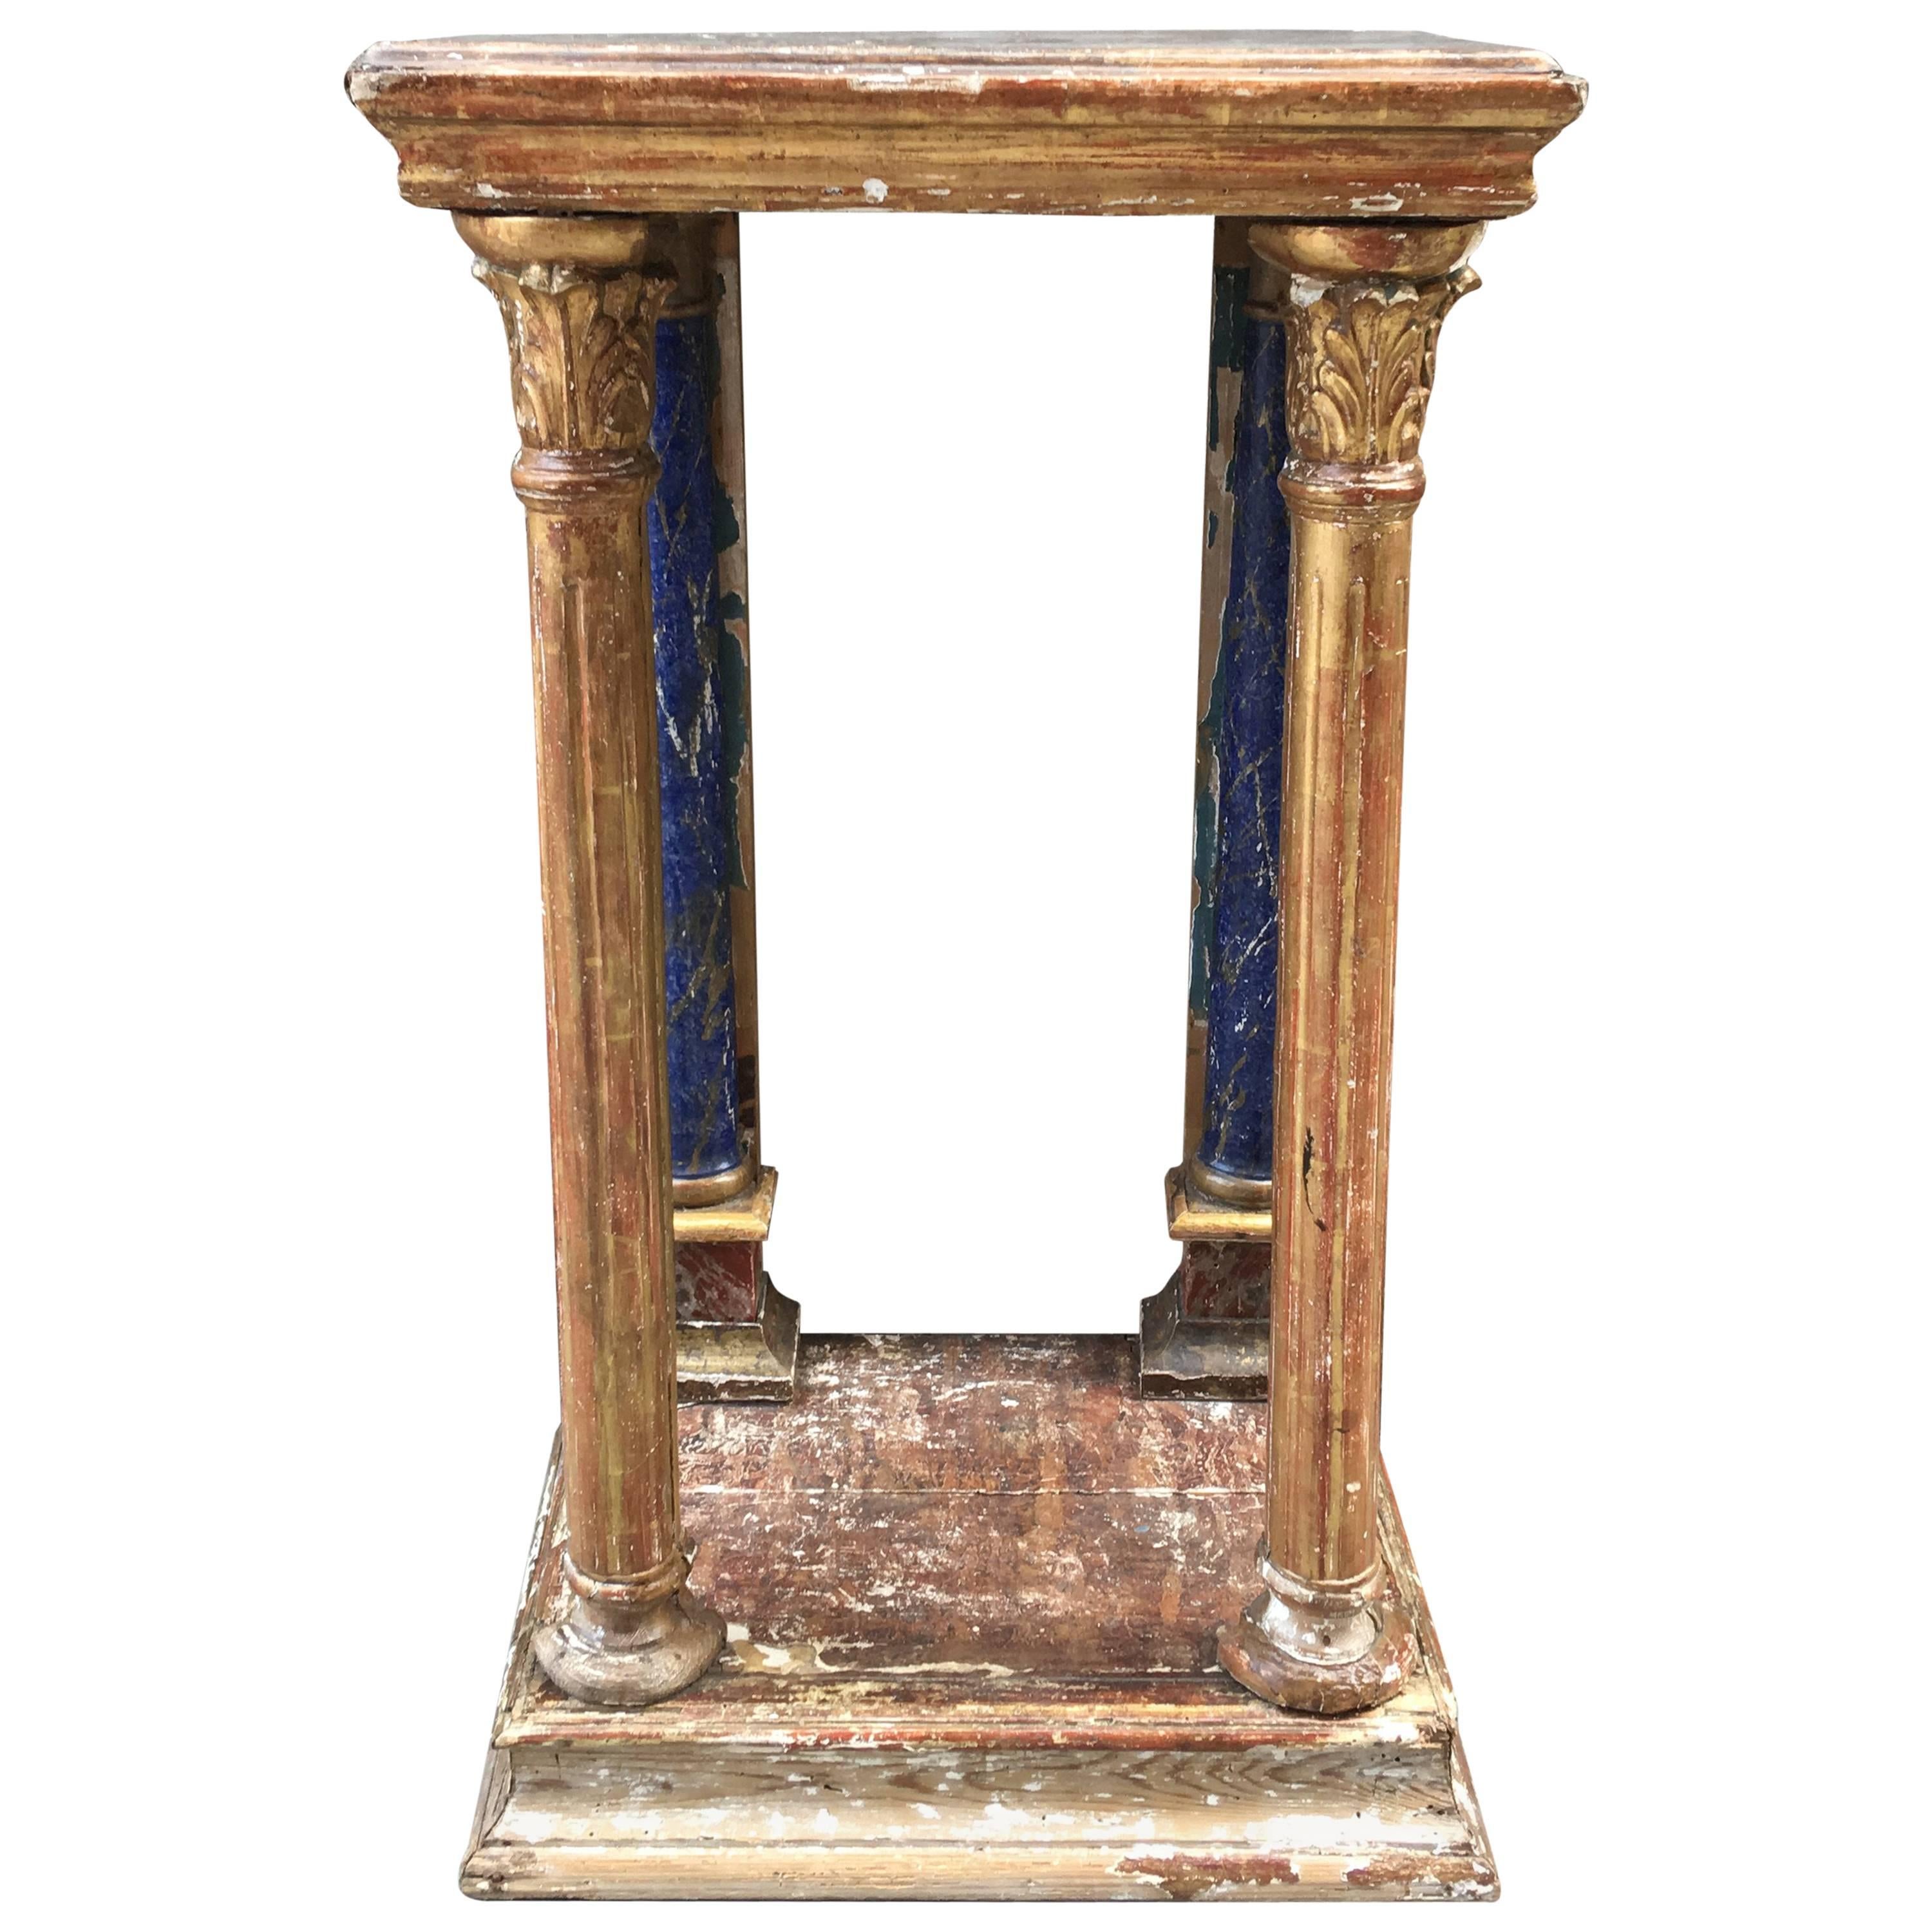 Italian Gold Gilt and Painted Pedestal from the Early 20th Century